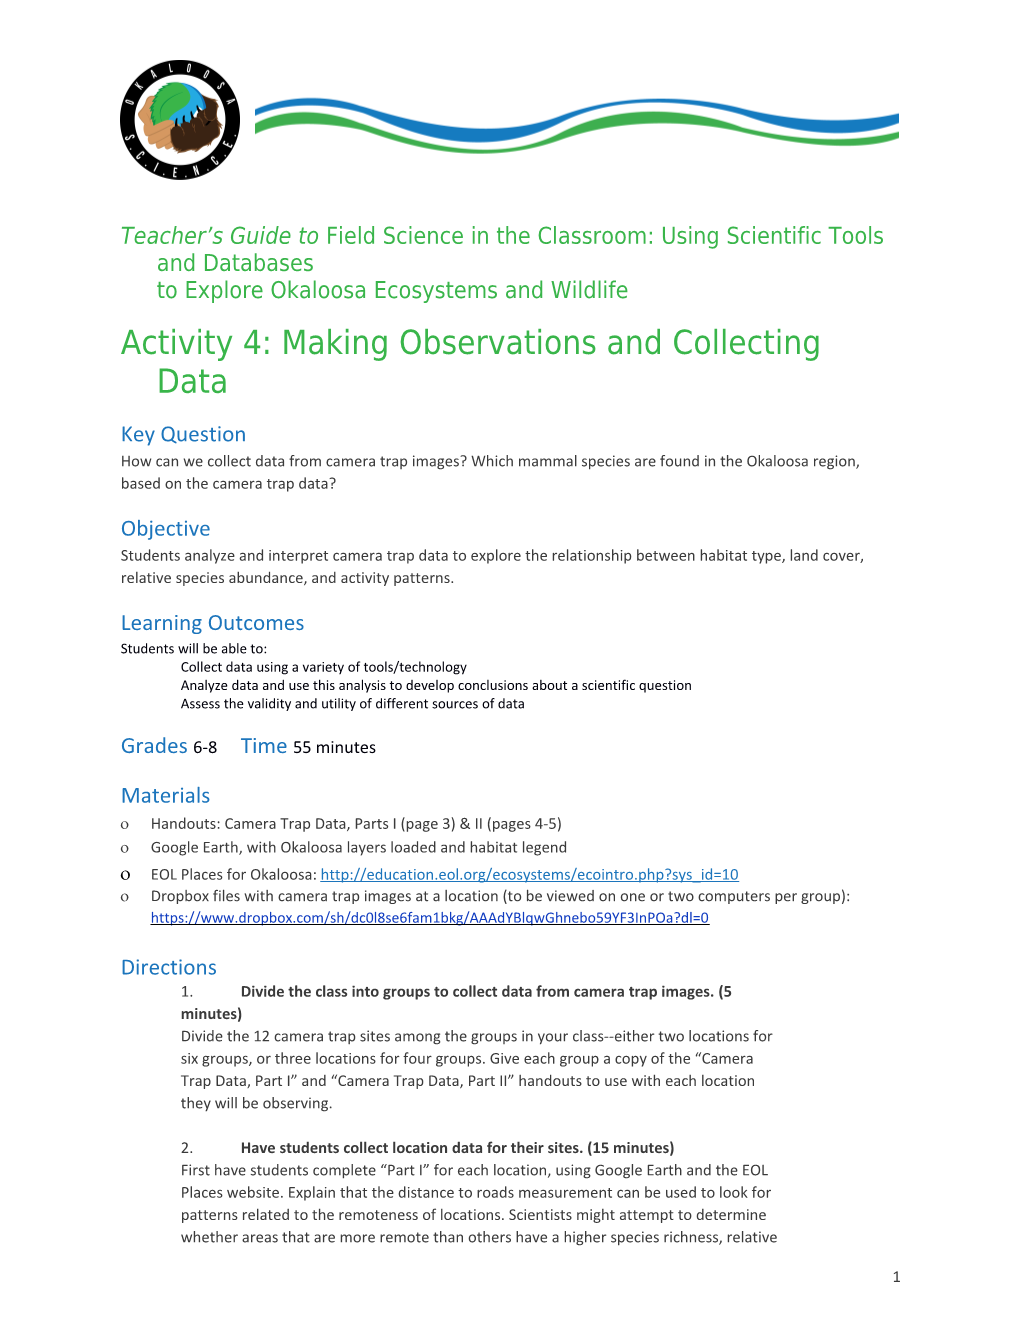 Activity 4: Making Observations and Collecting Data